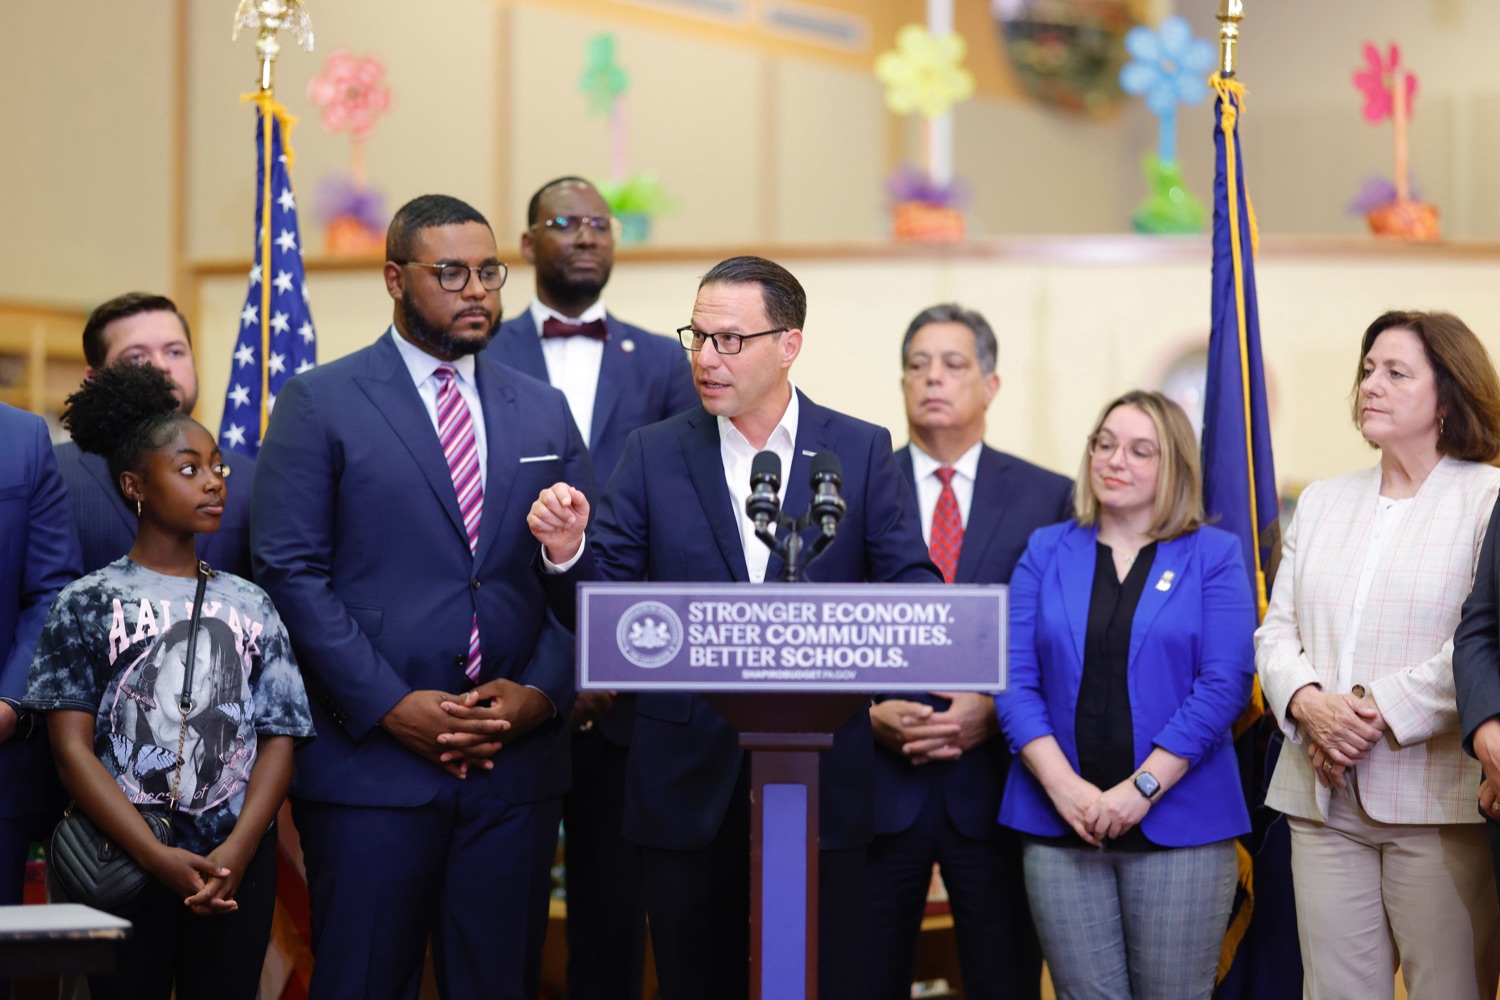 Governor Shapiro Signs Ceremonial Budget Bill Creating Universal Free Breakfast, Making Historic Investments in Public Education During Visit to Allegheny County Elementary School on August 8, 2023.<br><a href="https://filesource.amperwave.net/commonwealthofpa/photo/23563_Gov_Education_DZ_008.JPEG" target="_blank">⇣ Download Photo</a>